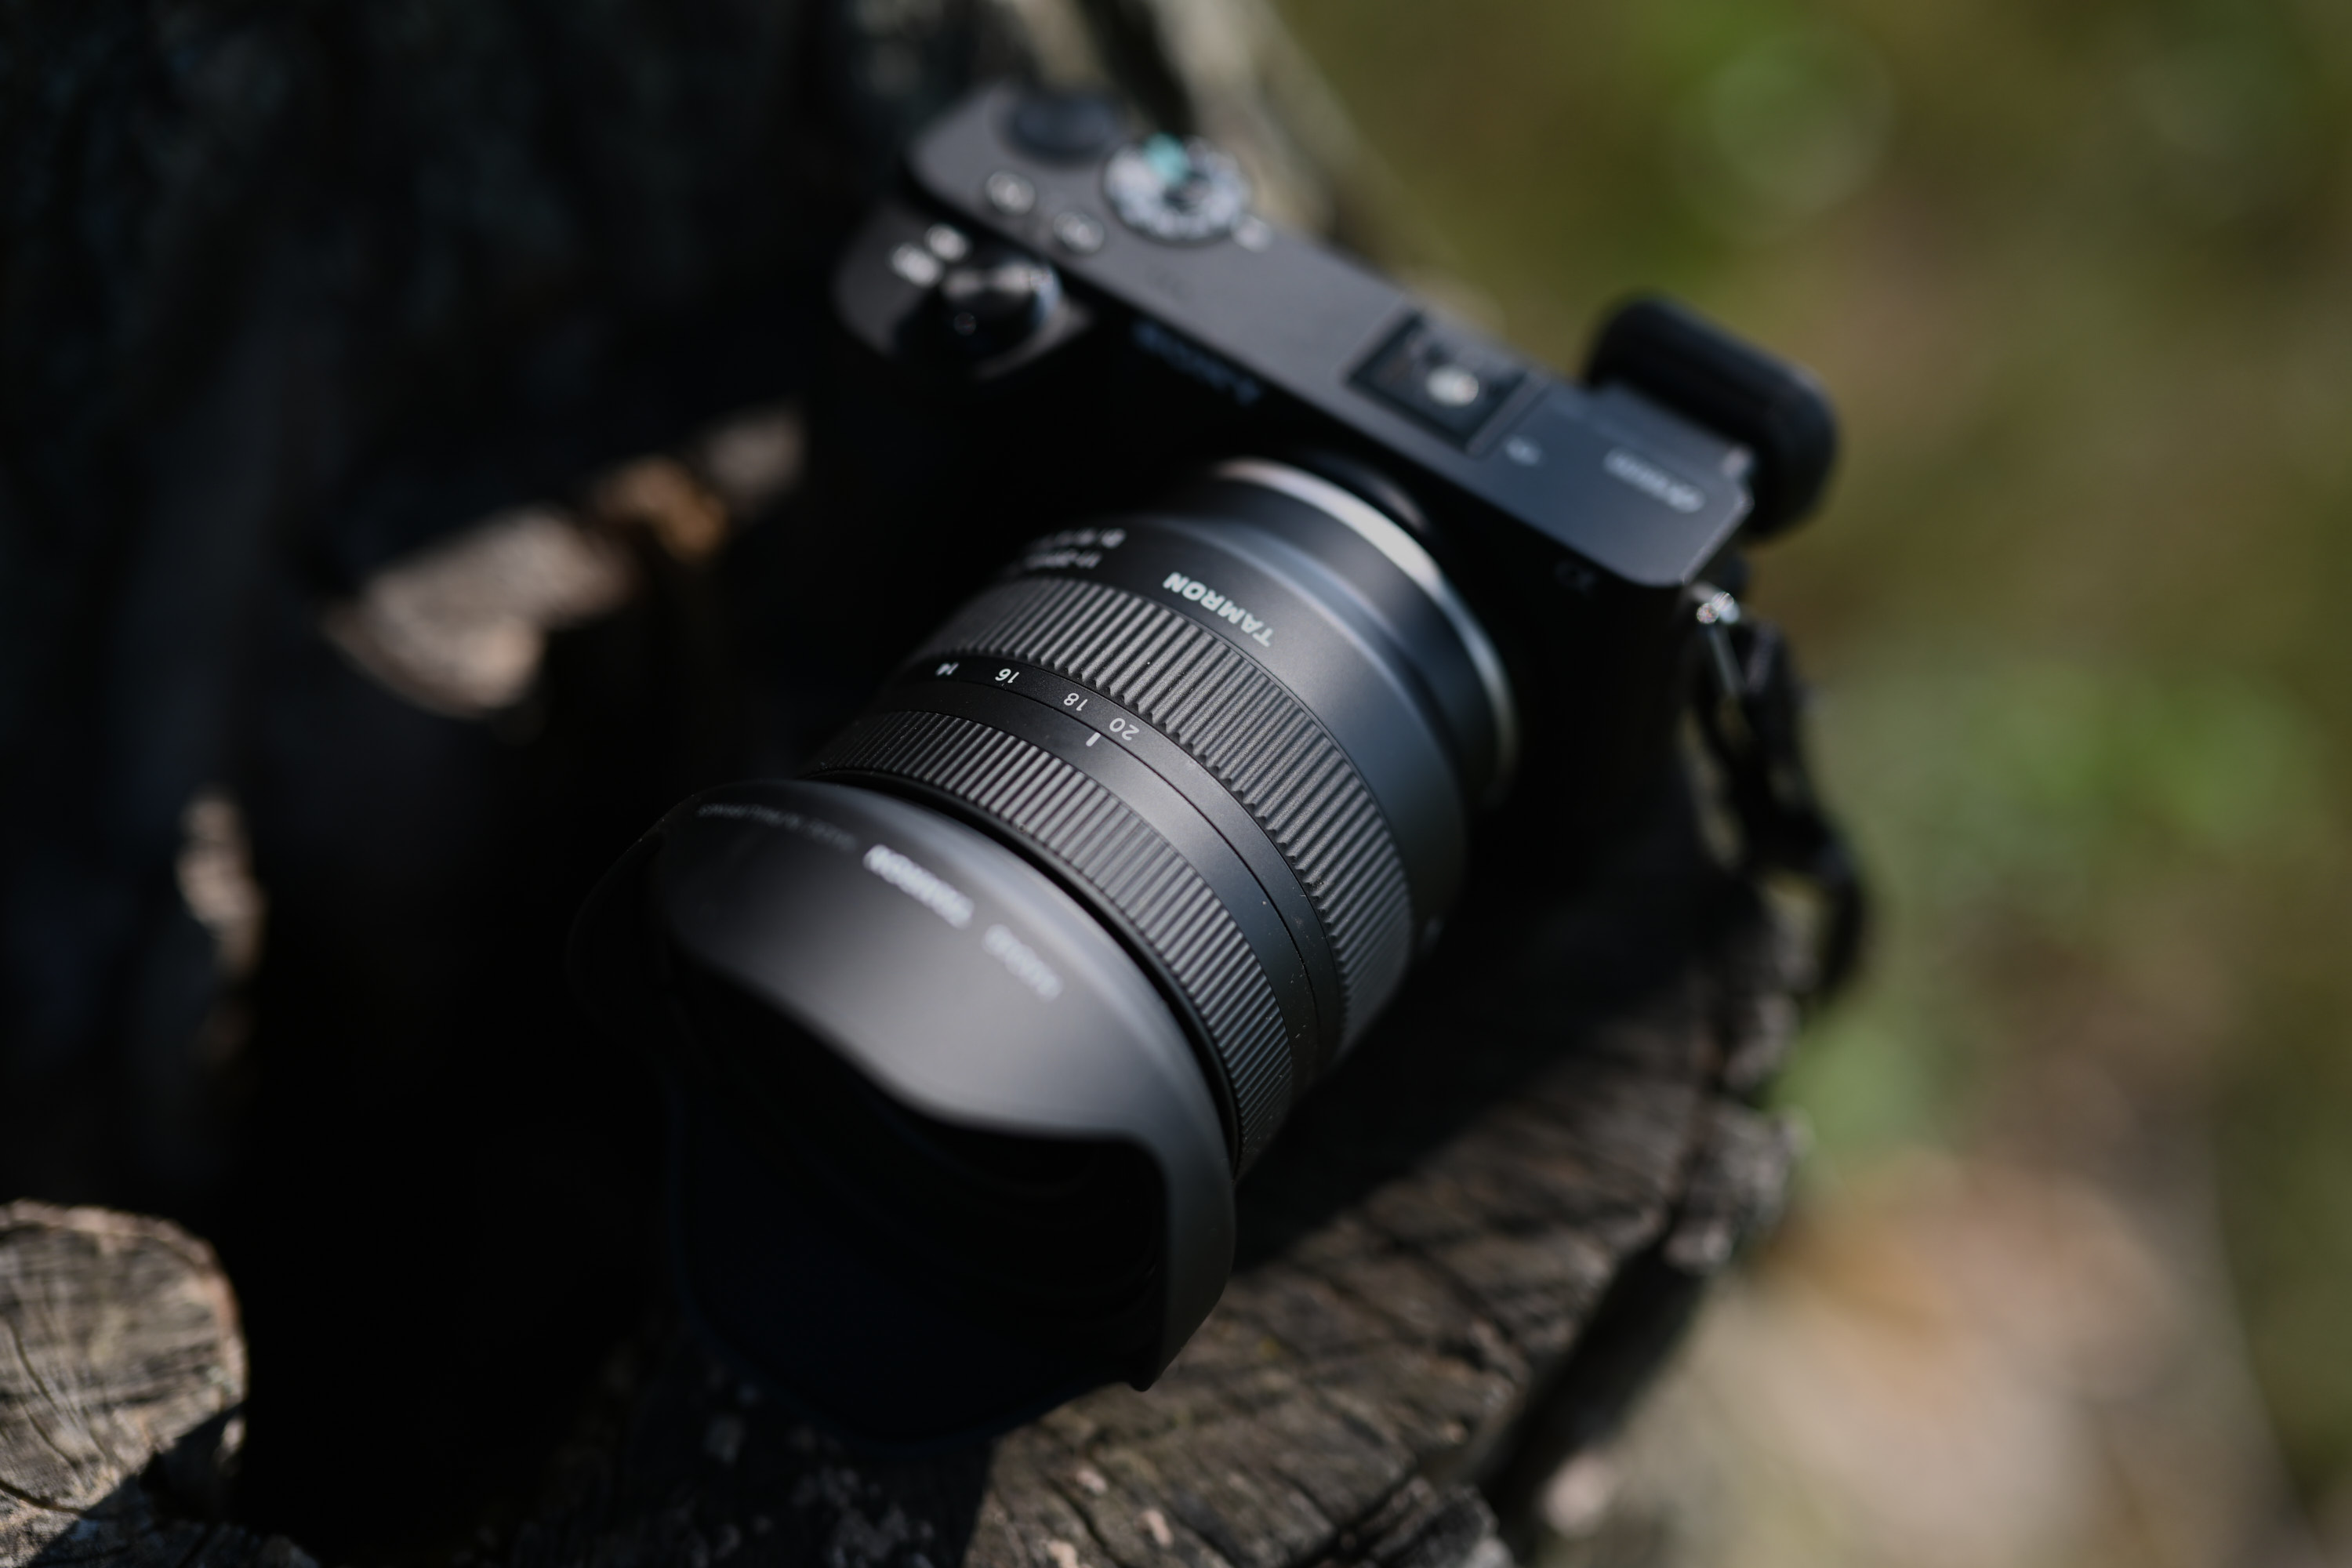 Tamron 11-20mm F2.8 Di III-A RXD Review: Outstanding Magic!